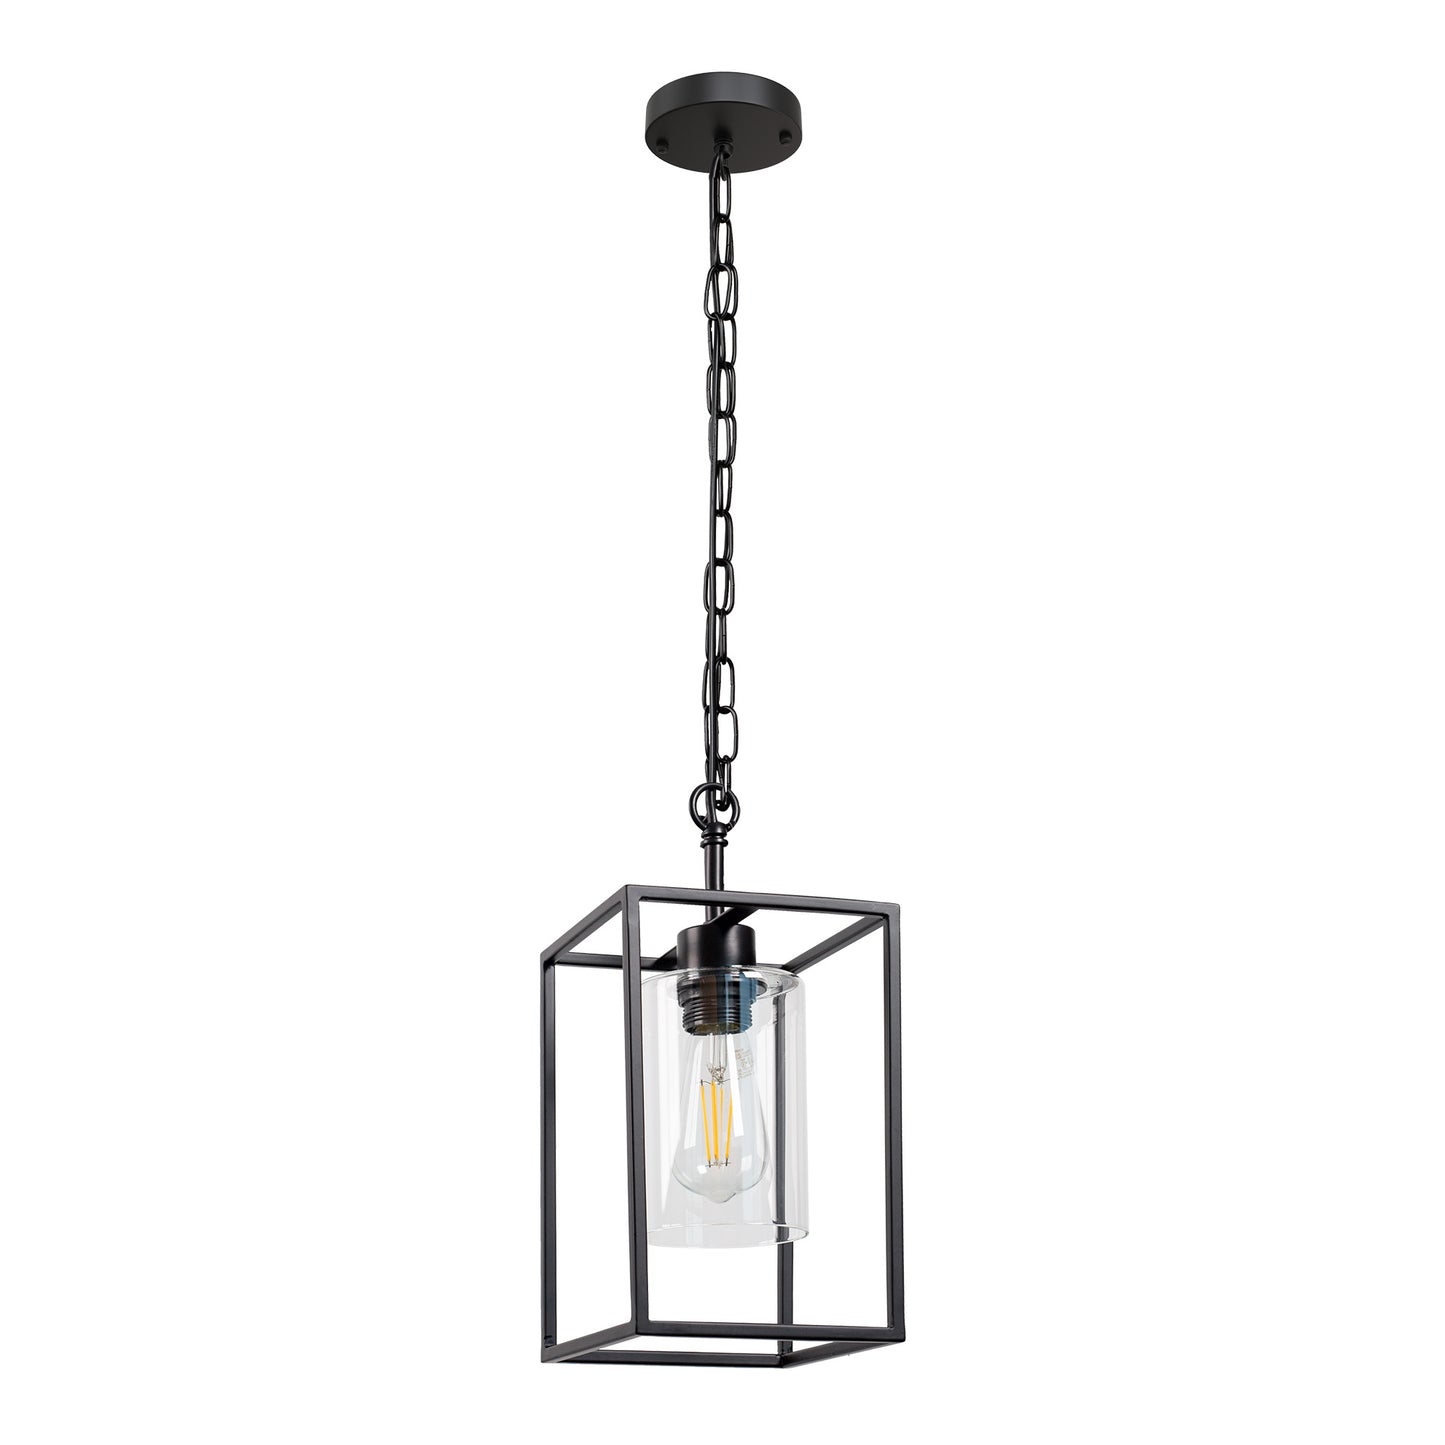 1-Light Industrial Metal Lantern Kitchen Pendant Light,Mini Black Finish with Clear Glass Shade,Adjustable Hanging Ceiling Light for Dining Room Kitchen Cafe Bar